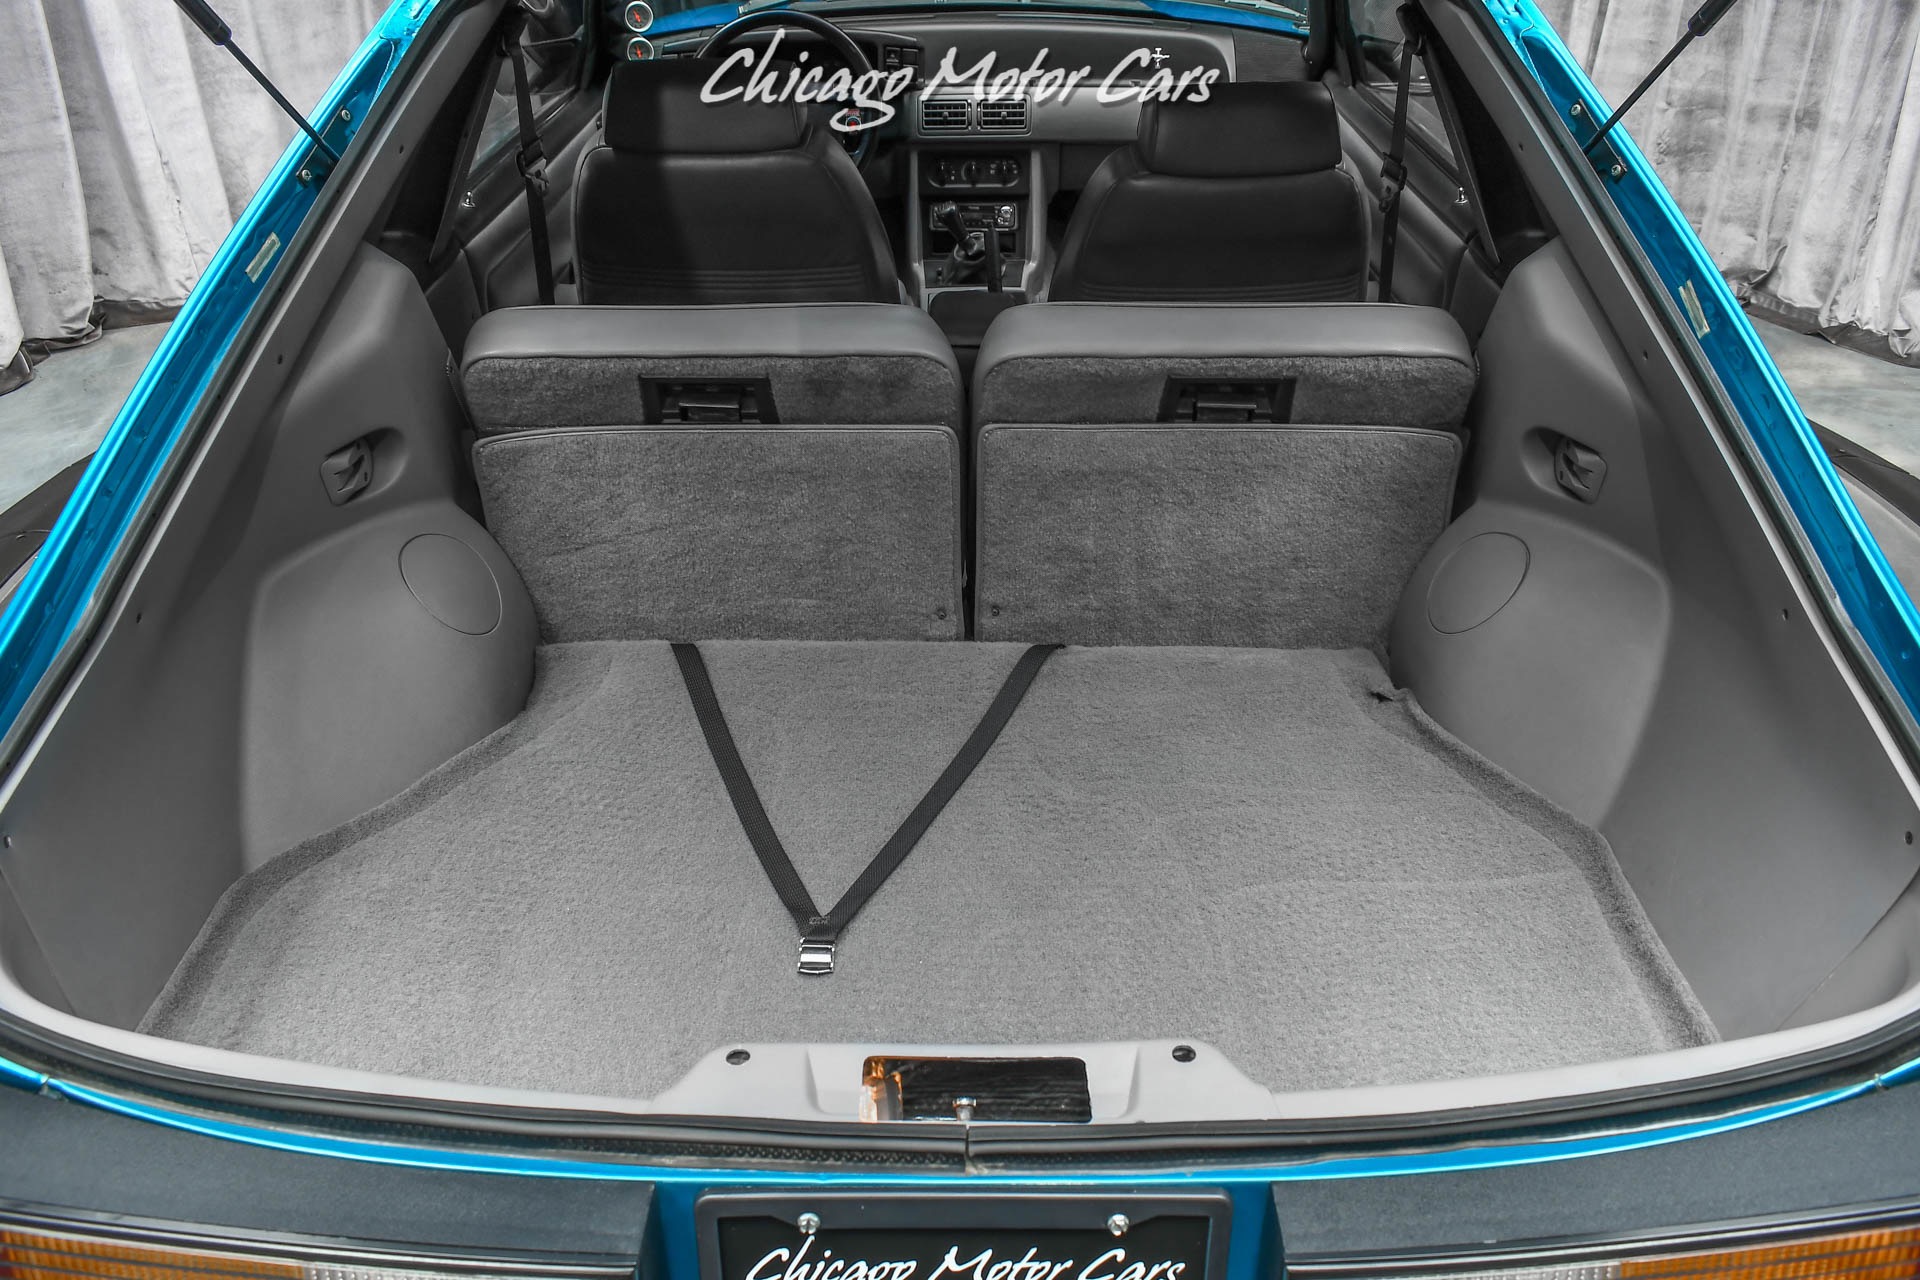 Used-1993-Ford-Mustang-SVT-Cobra-1-OF-1355-IN-TEAL-LEATHER-SVT-VORTECH-SUPERCHARGED